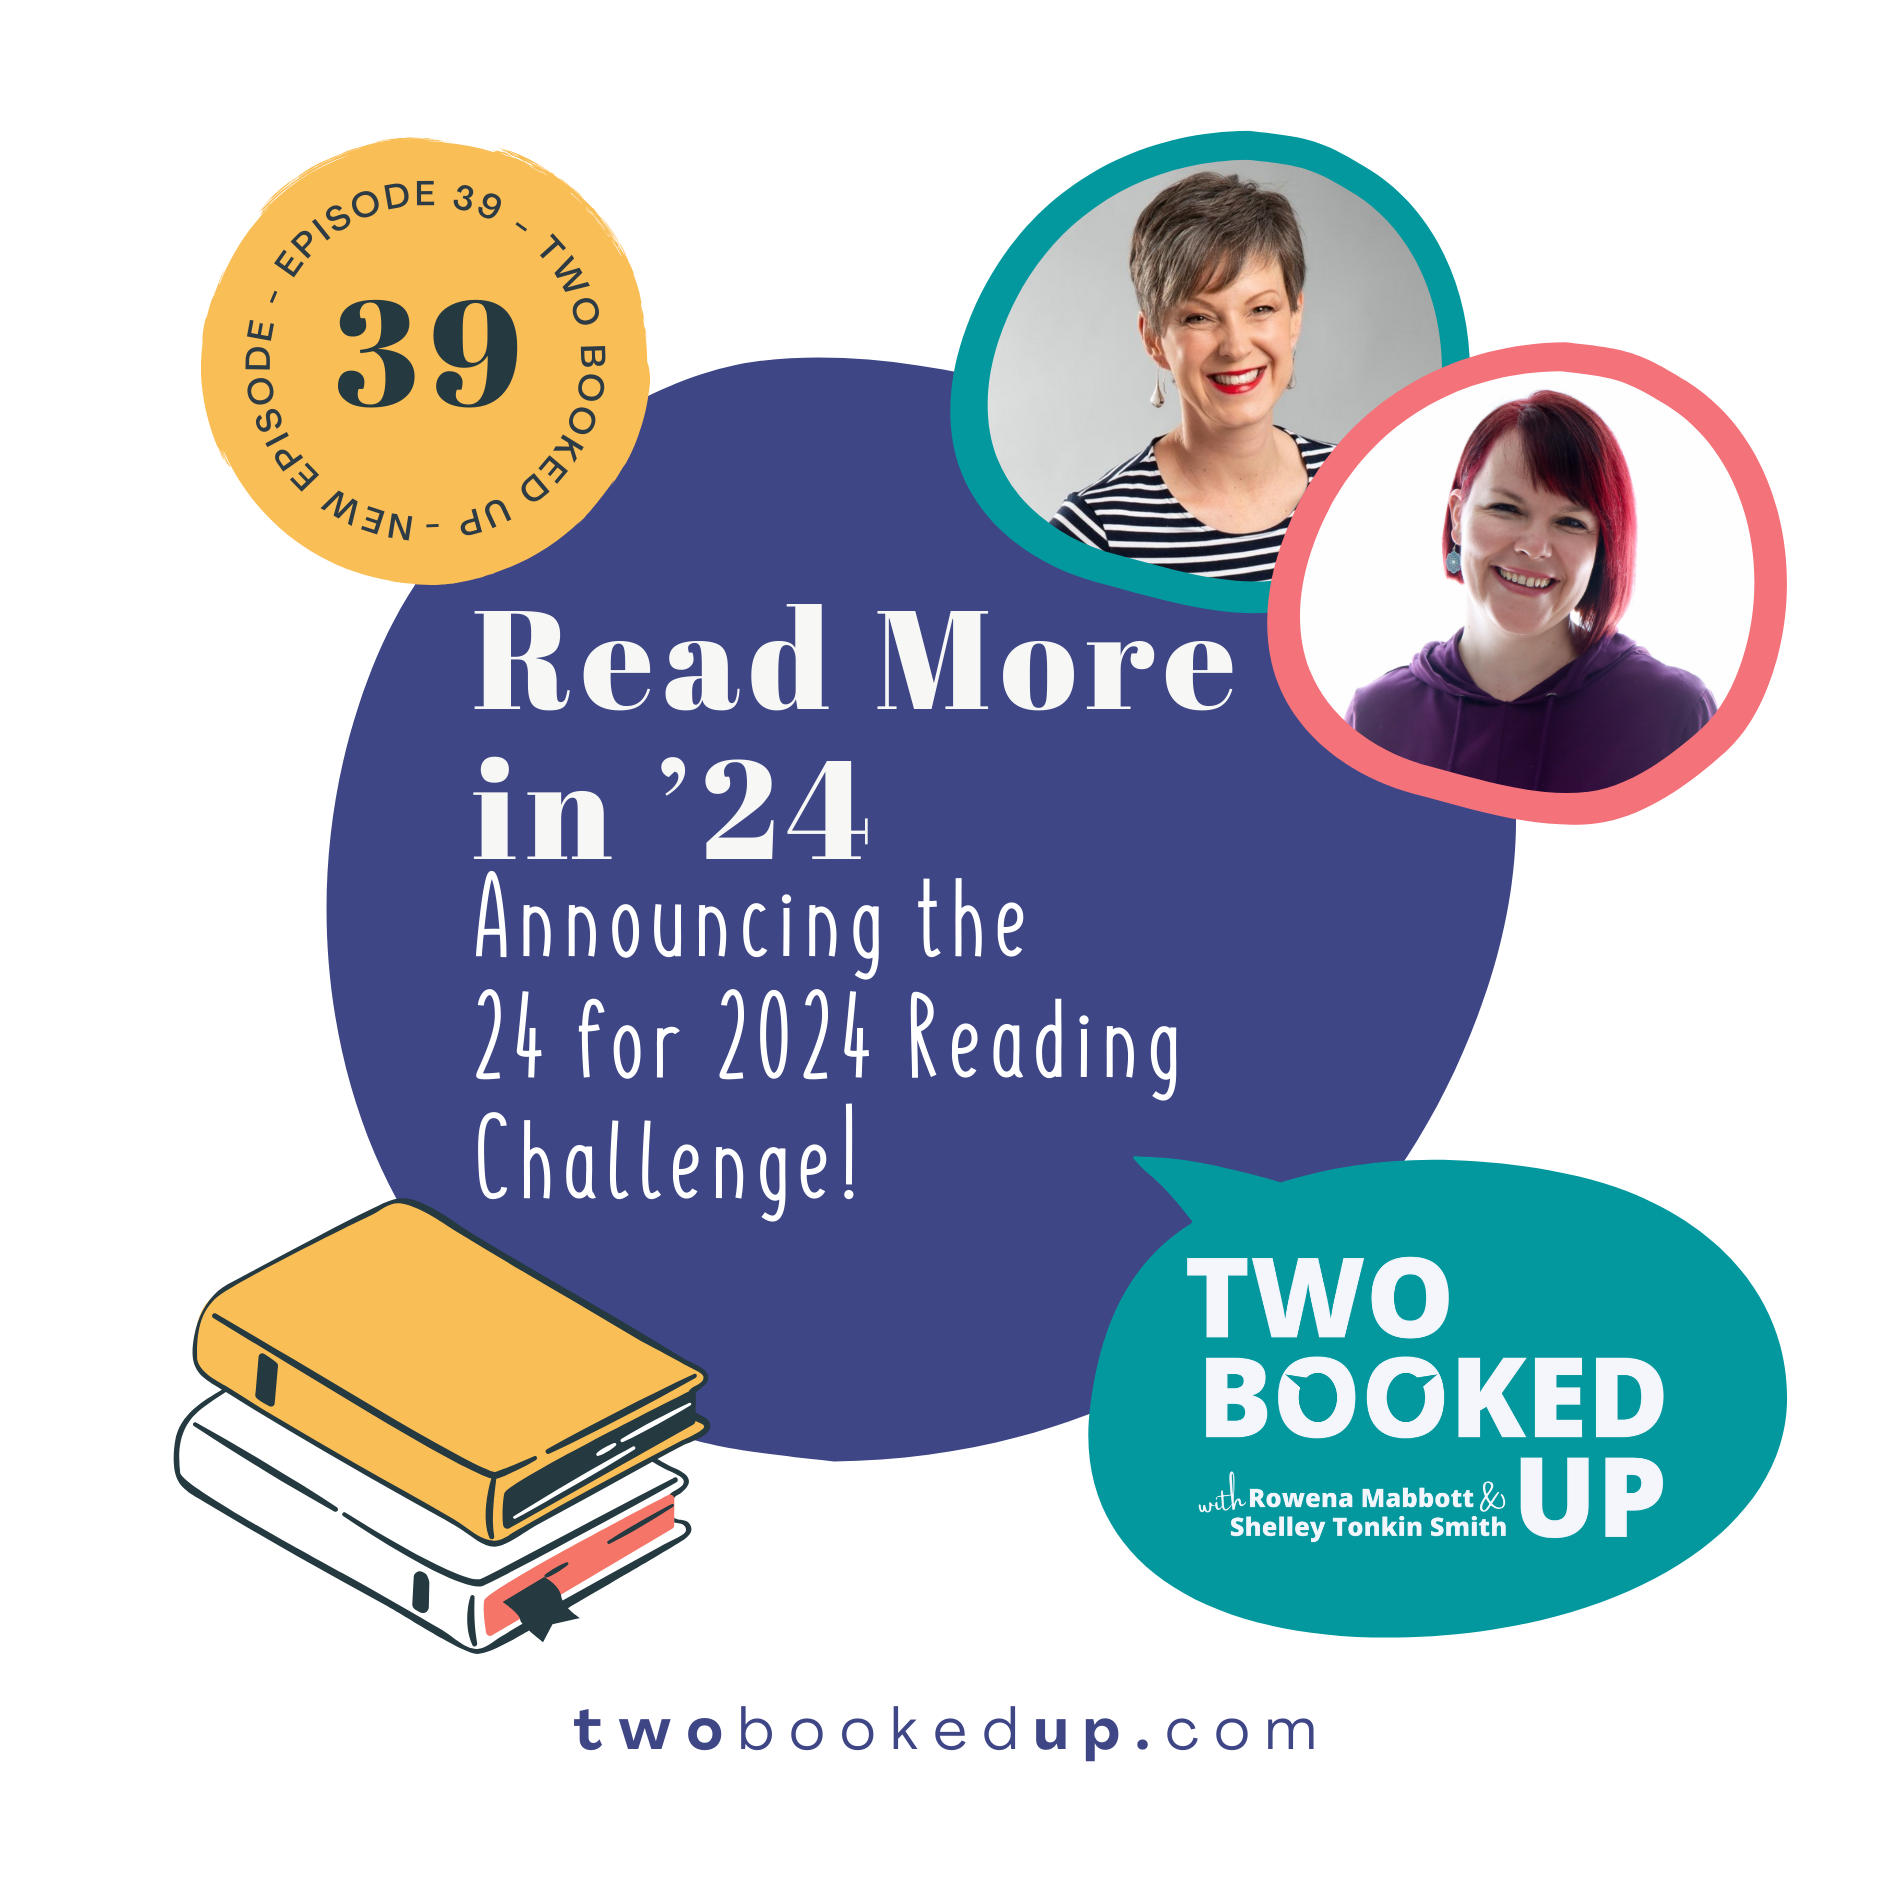 TBU#39: Read more in 24! Announcing the 24 for 2024 Reading Challenge